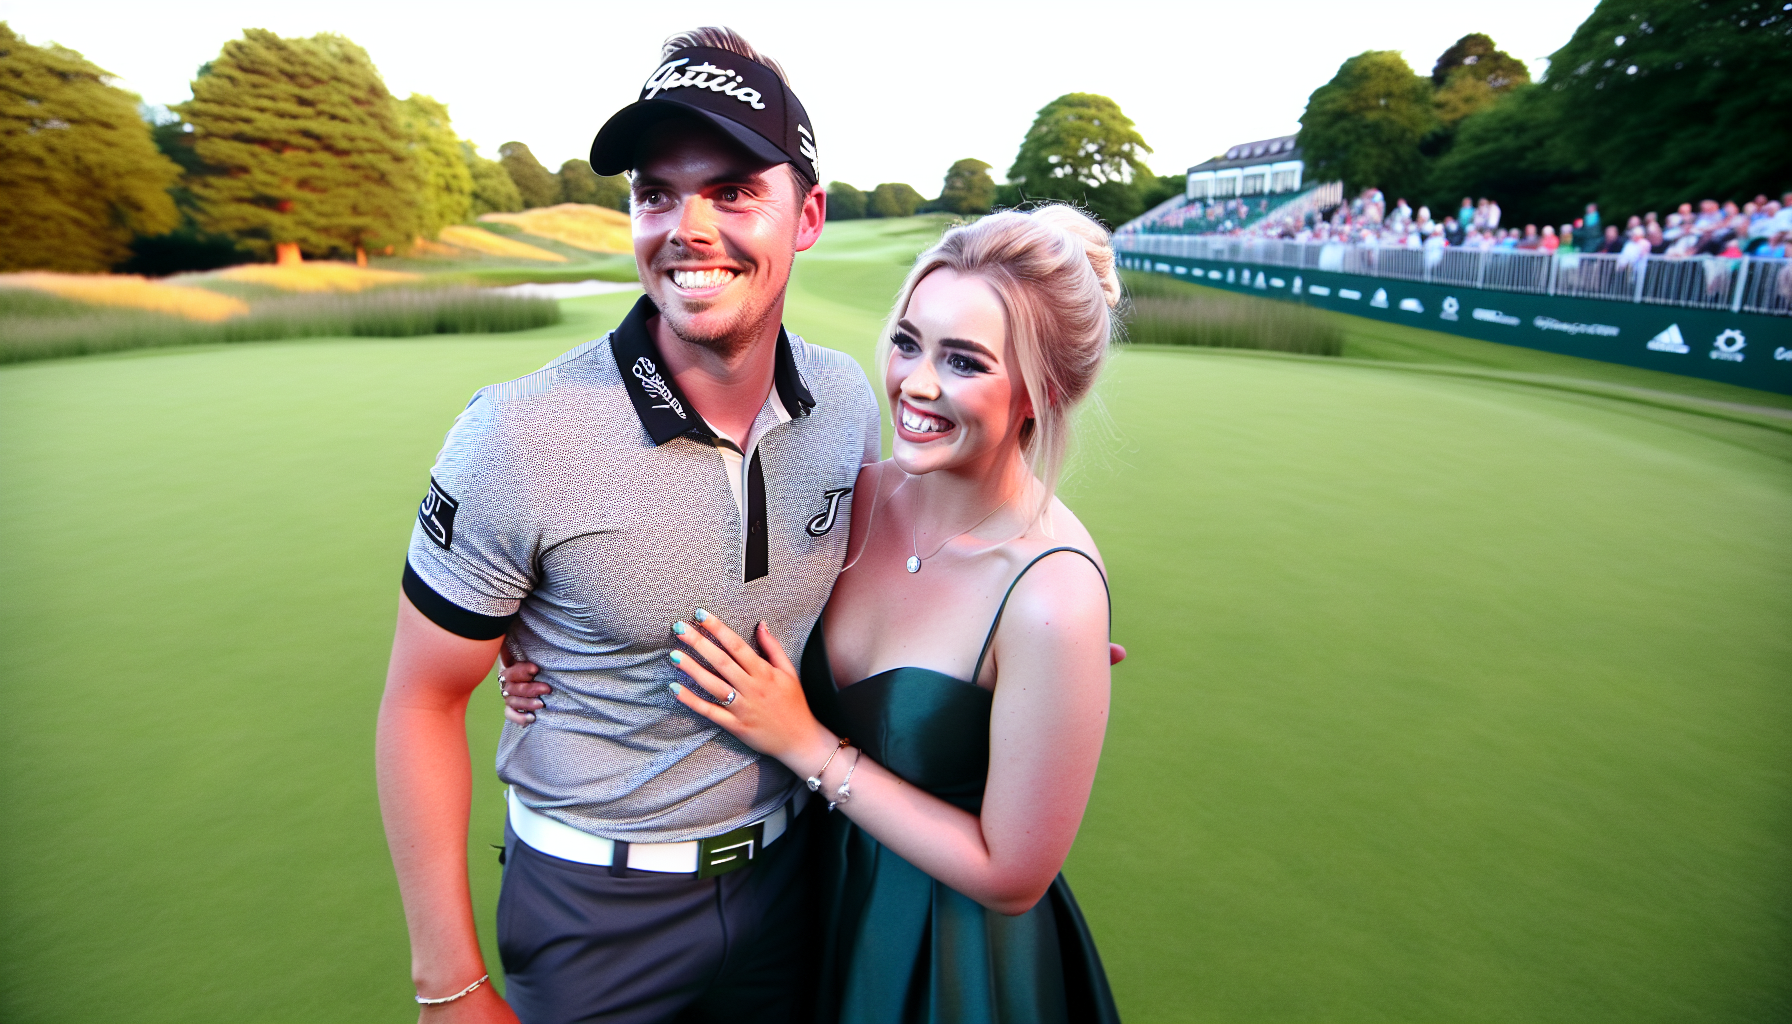 Jordan Spieth and his wife Annie Verret smiling together at a golf event